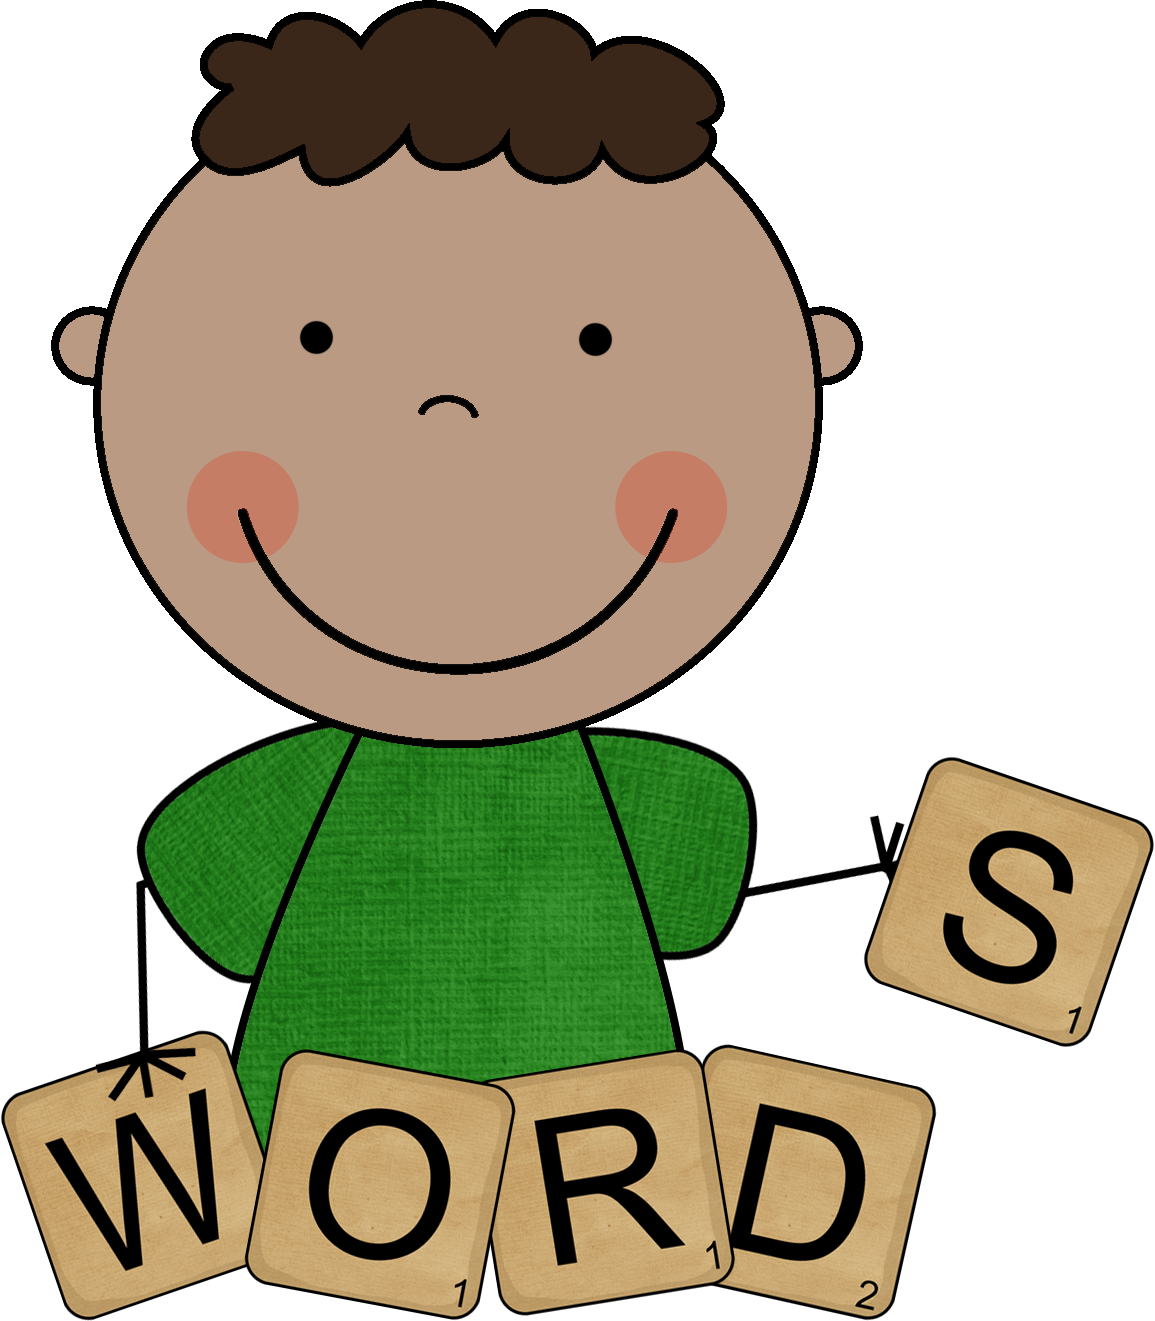 Working clipart word. Vocabulary drawing at getdrawings